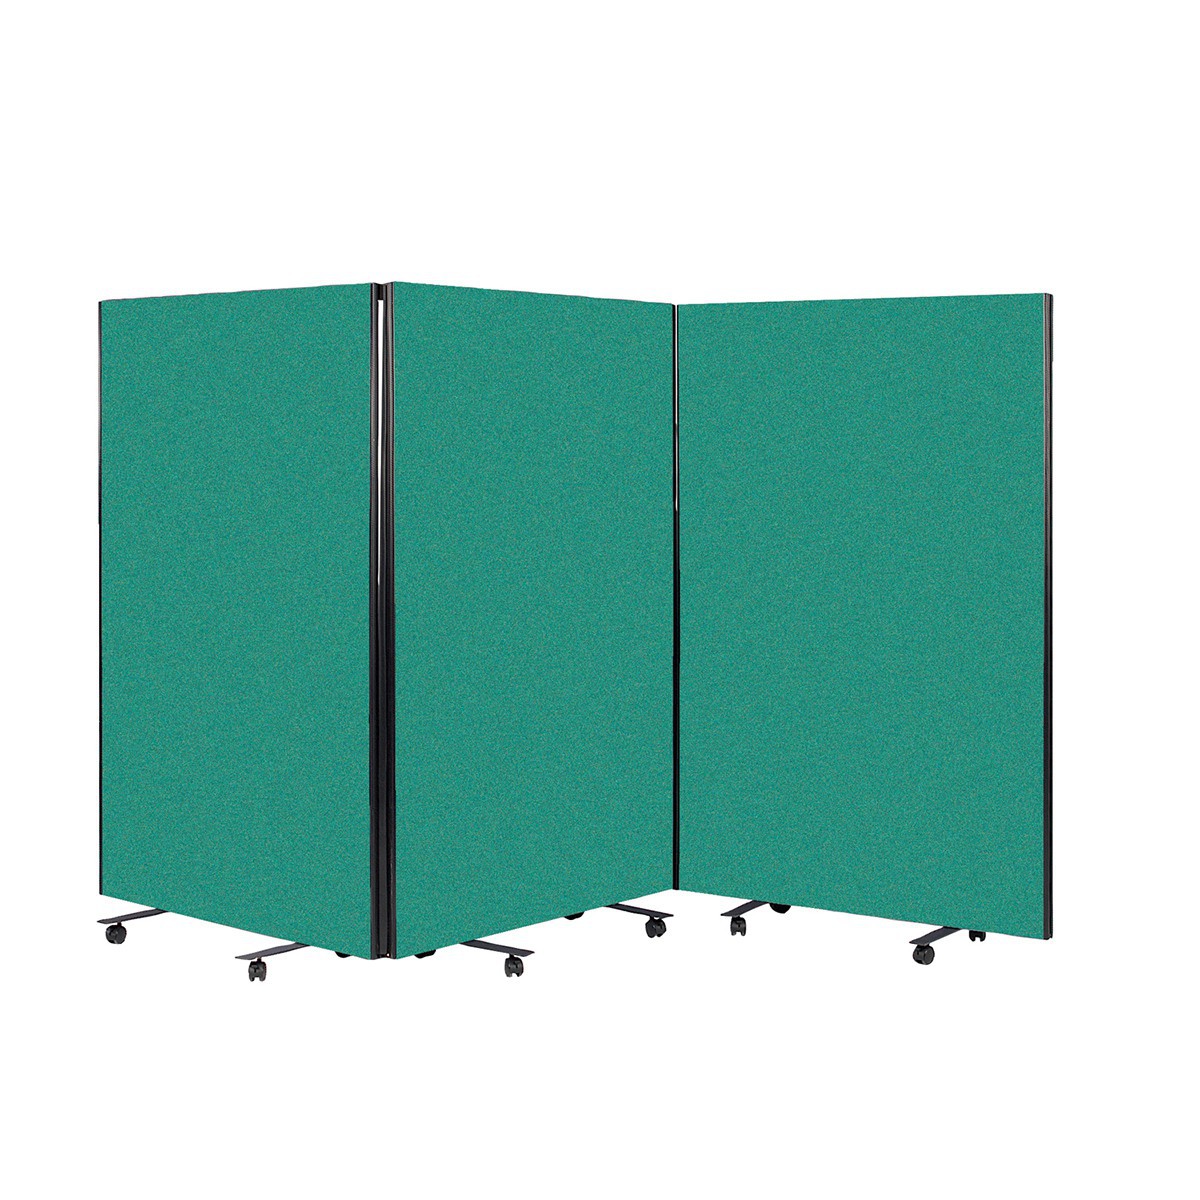 BusyScreen Triple Safety Partition - Woven Cloth